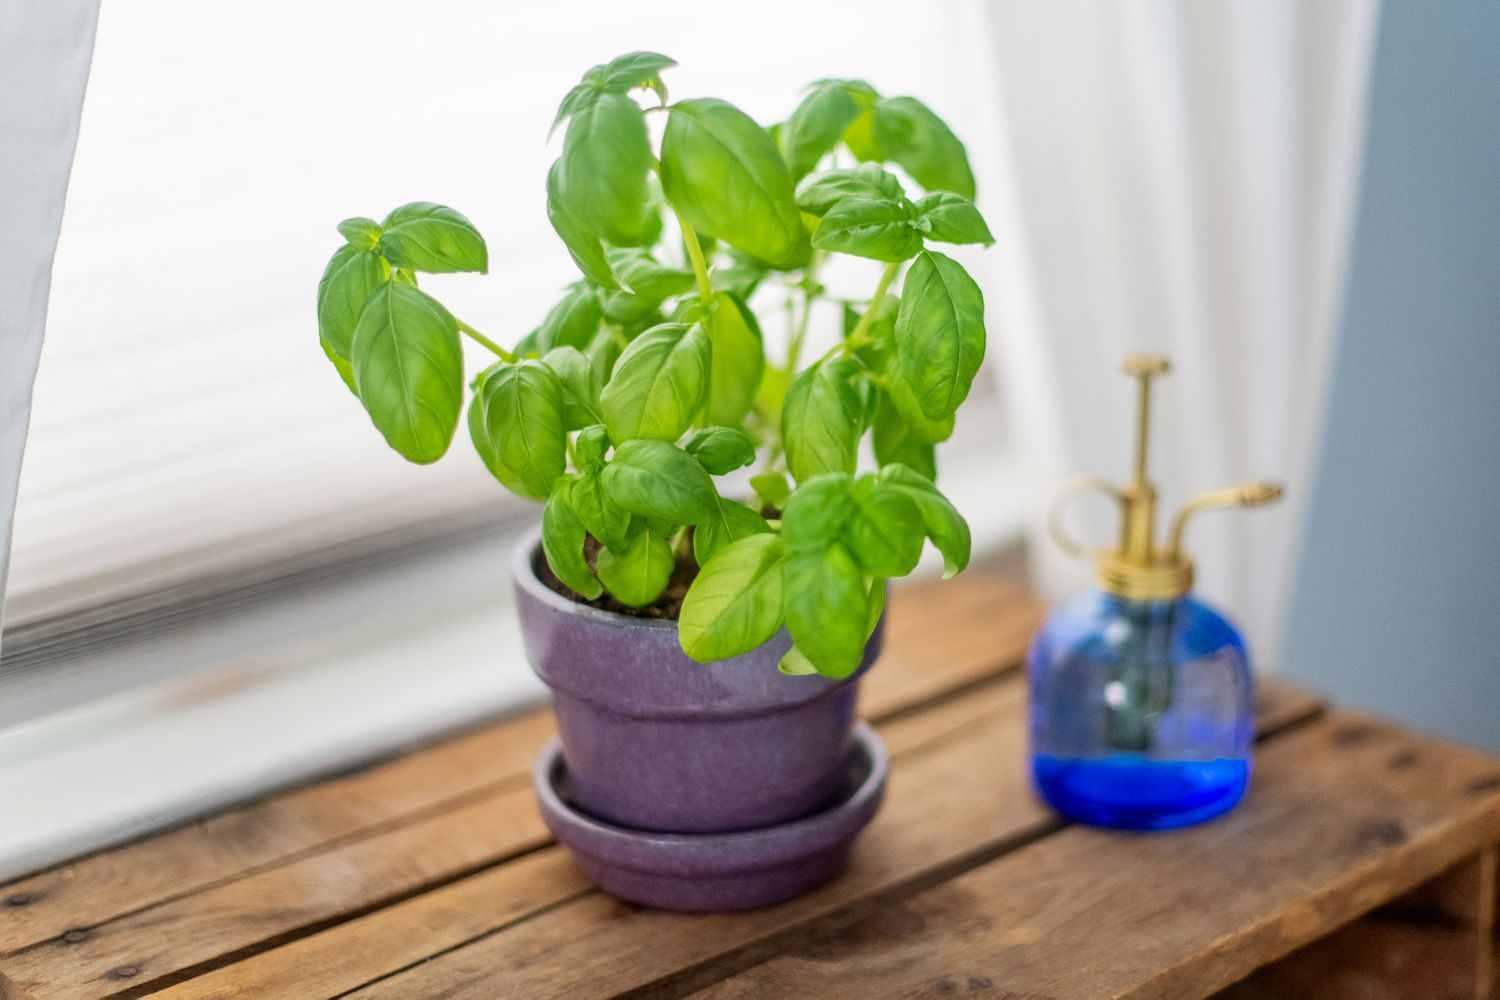 Best Way to Water Basil: